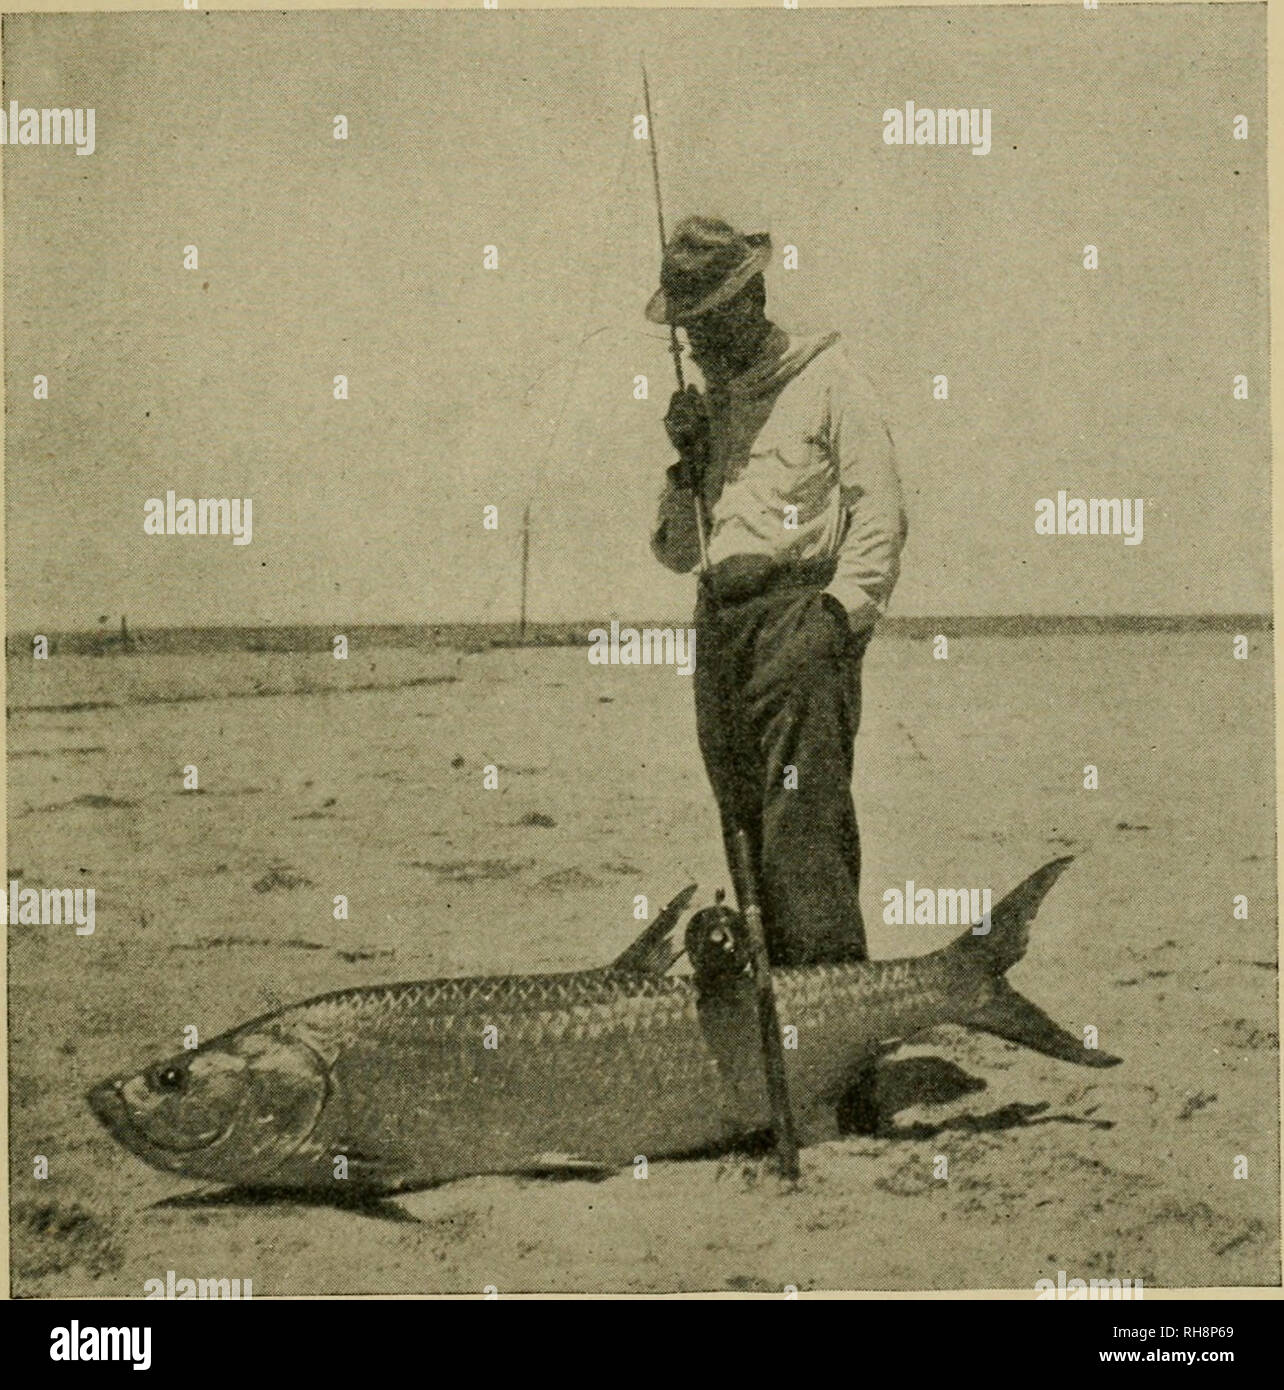 The boy anglers; their adventures in the Gulf of Mexico